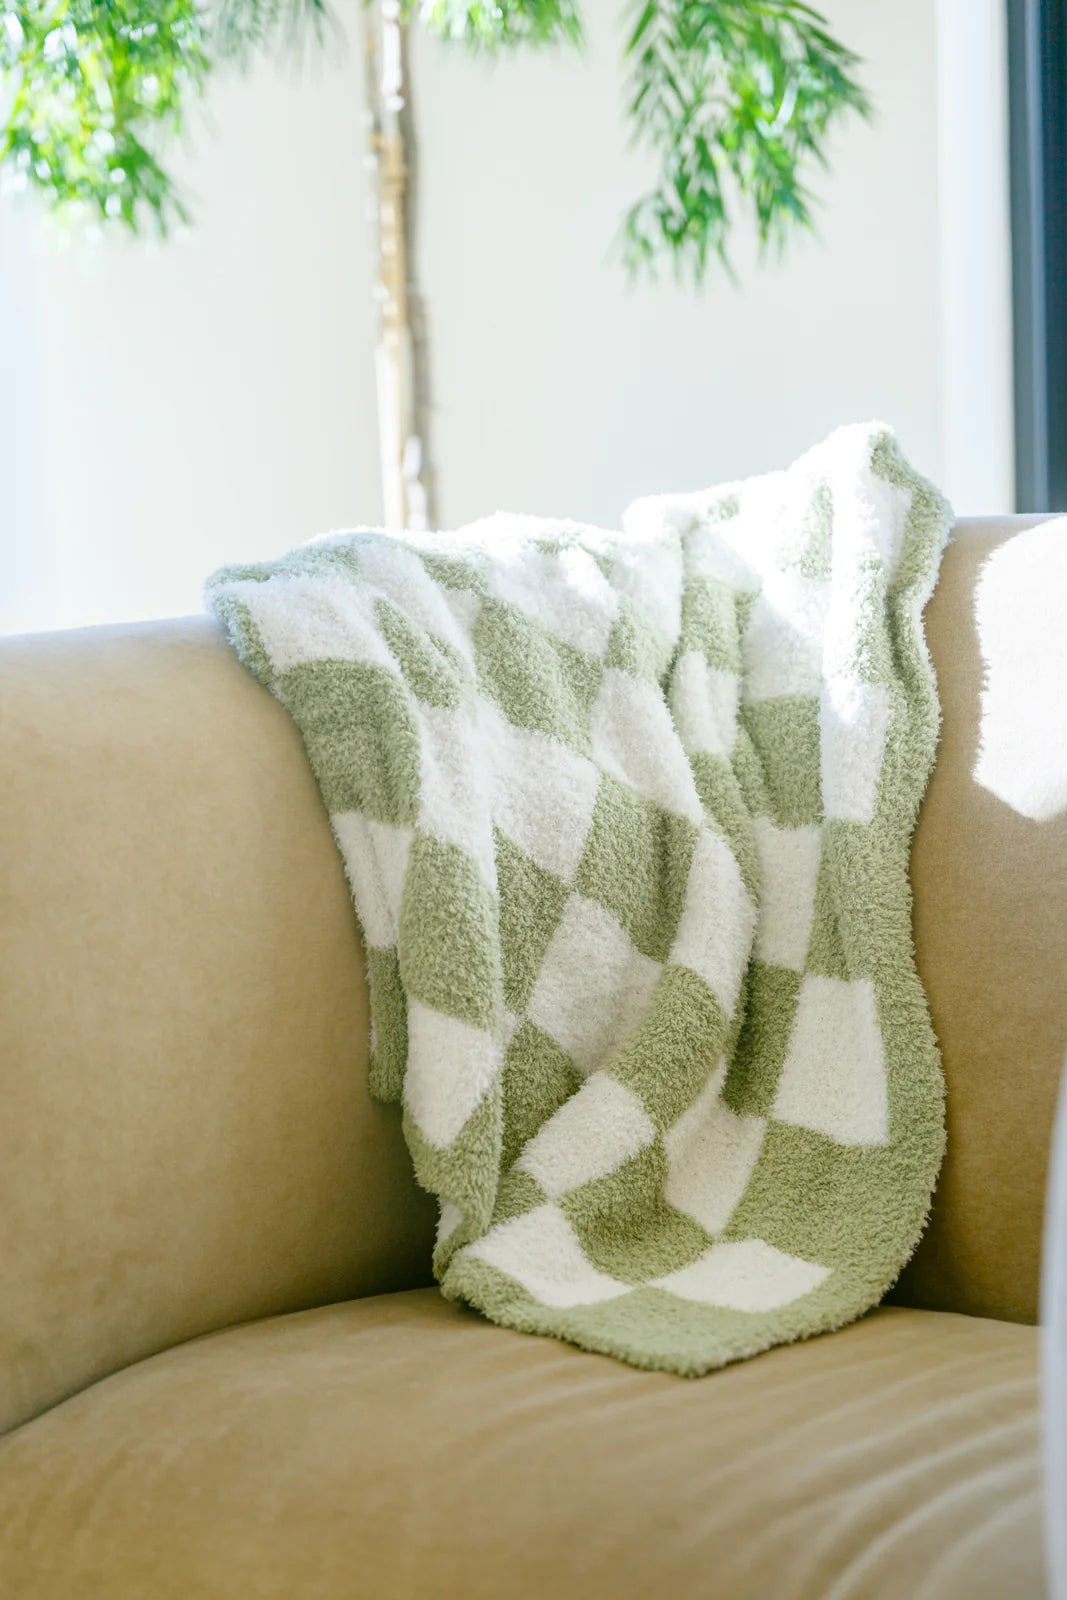 Checkered Knit Throw Blanket